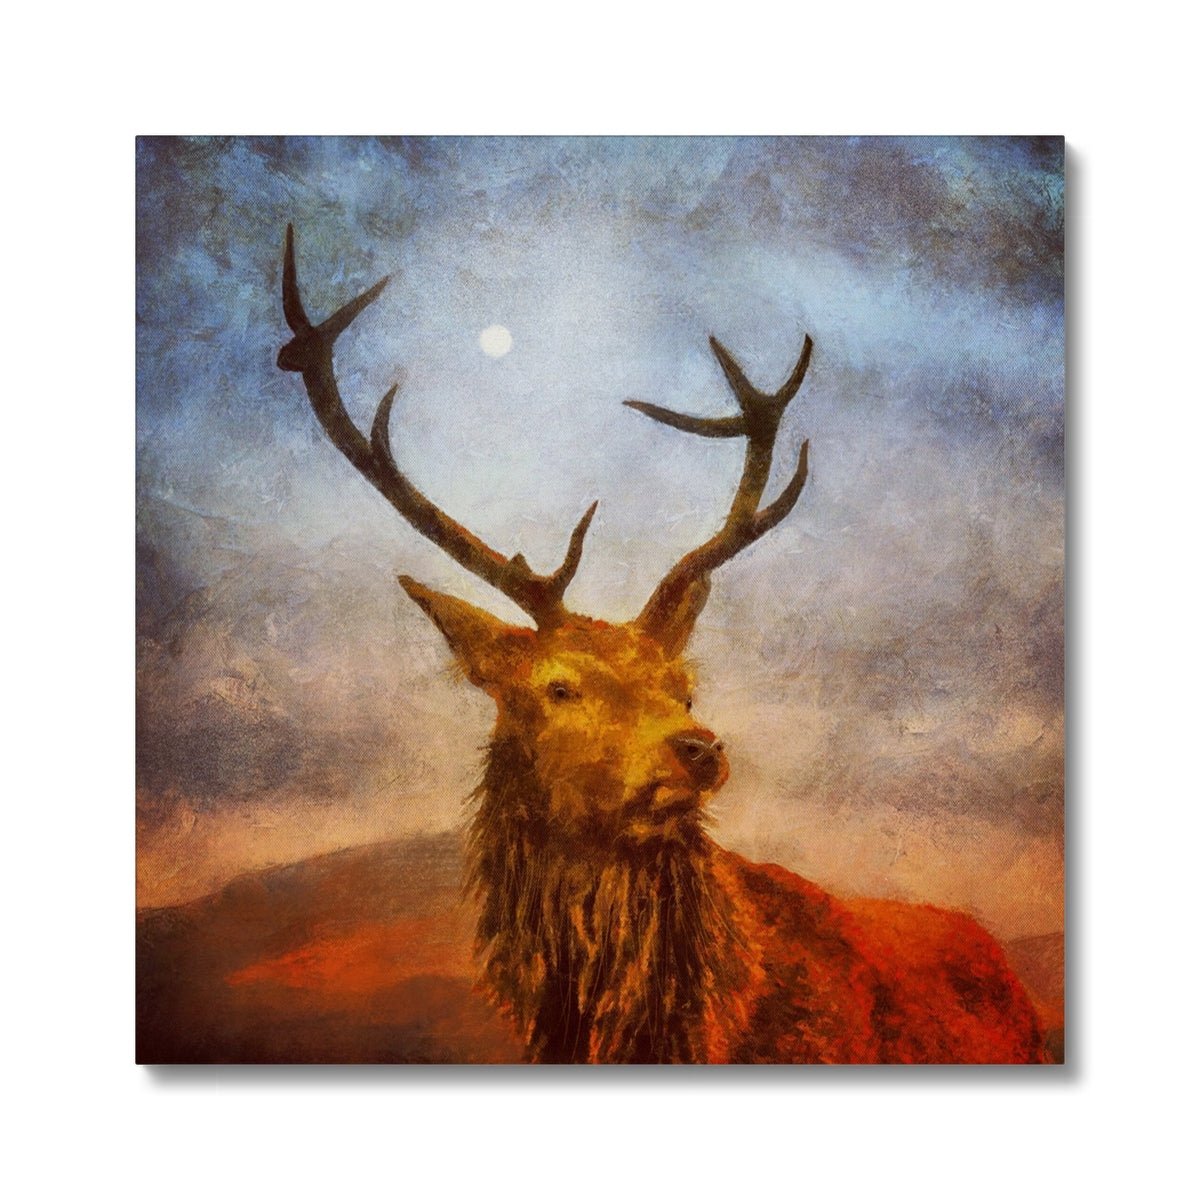 A Moonlit Highland Stag Painting | Canvas From Scotland-Contemporary Stretched Canvas Prints-Scottish Highlands & Lowlands Art Gallery-24"x24"-Paintings, Prints, Homeware, Art Gifts From Scotland By Scottish Artist Kevin Hunter